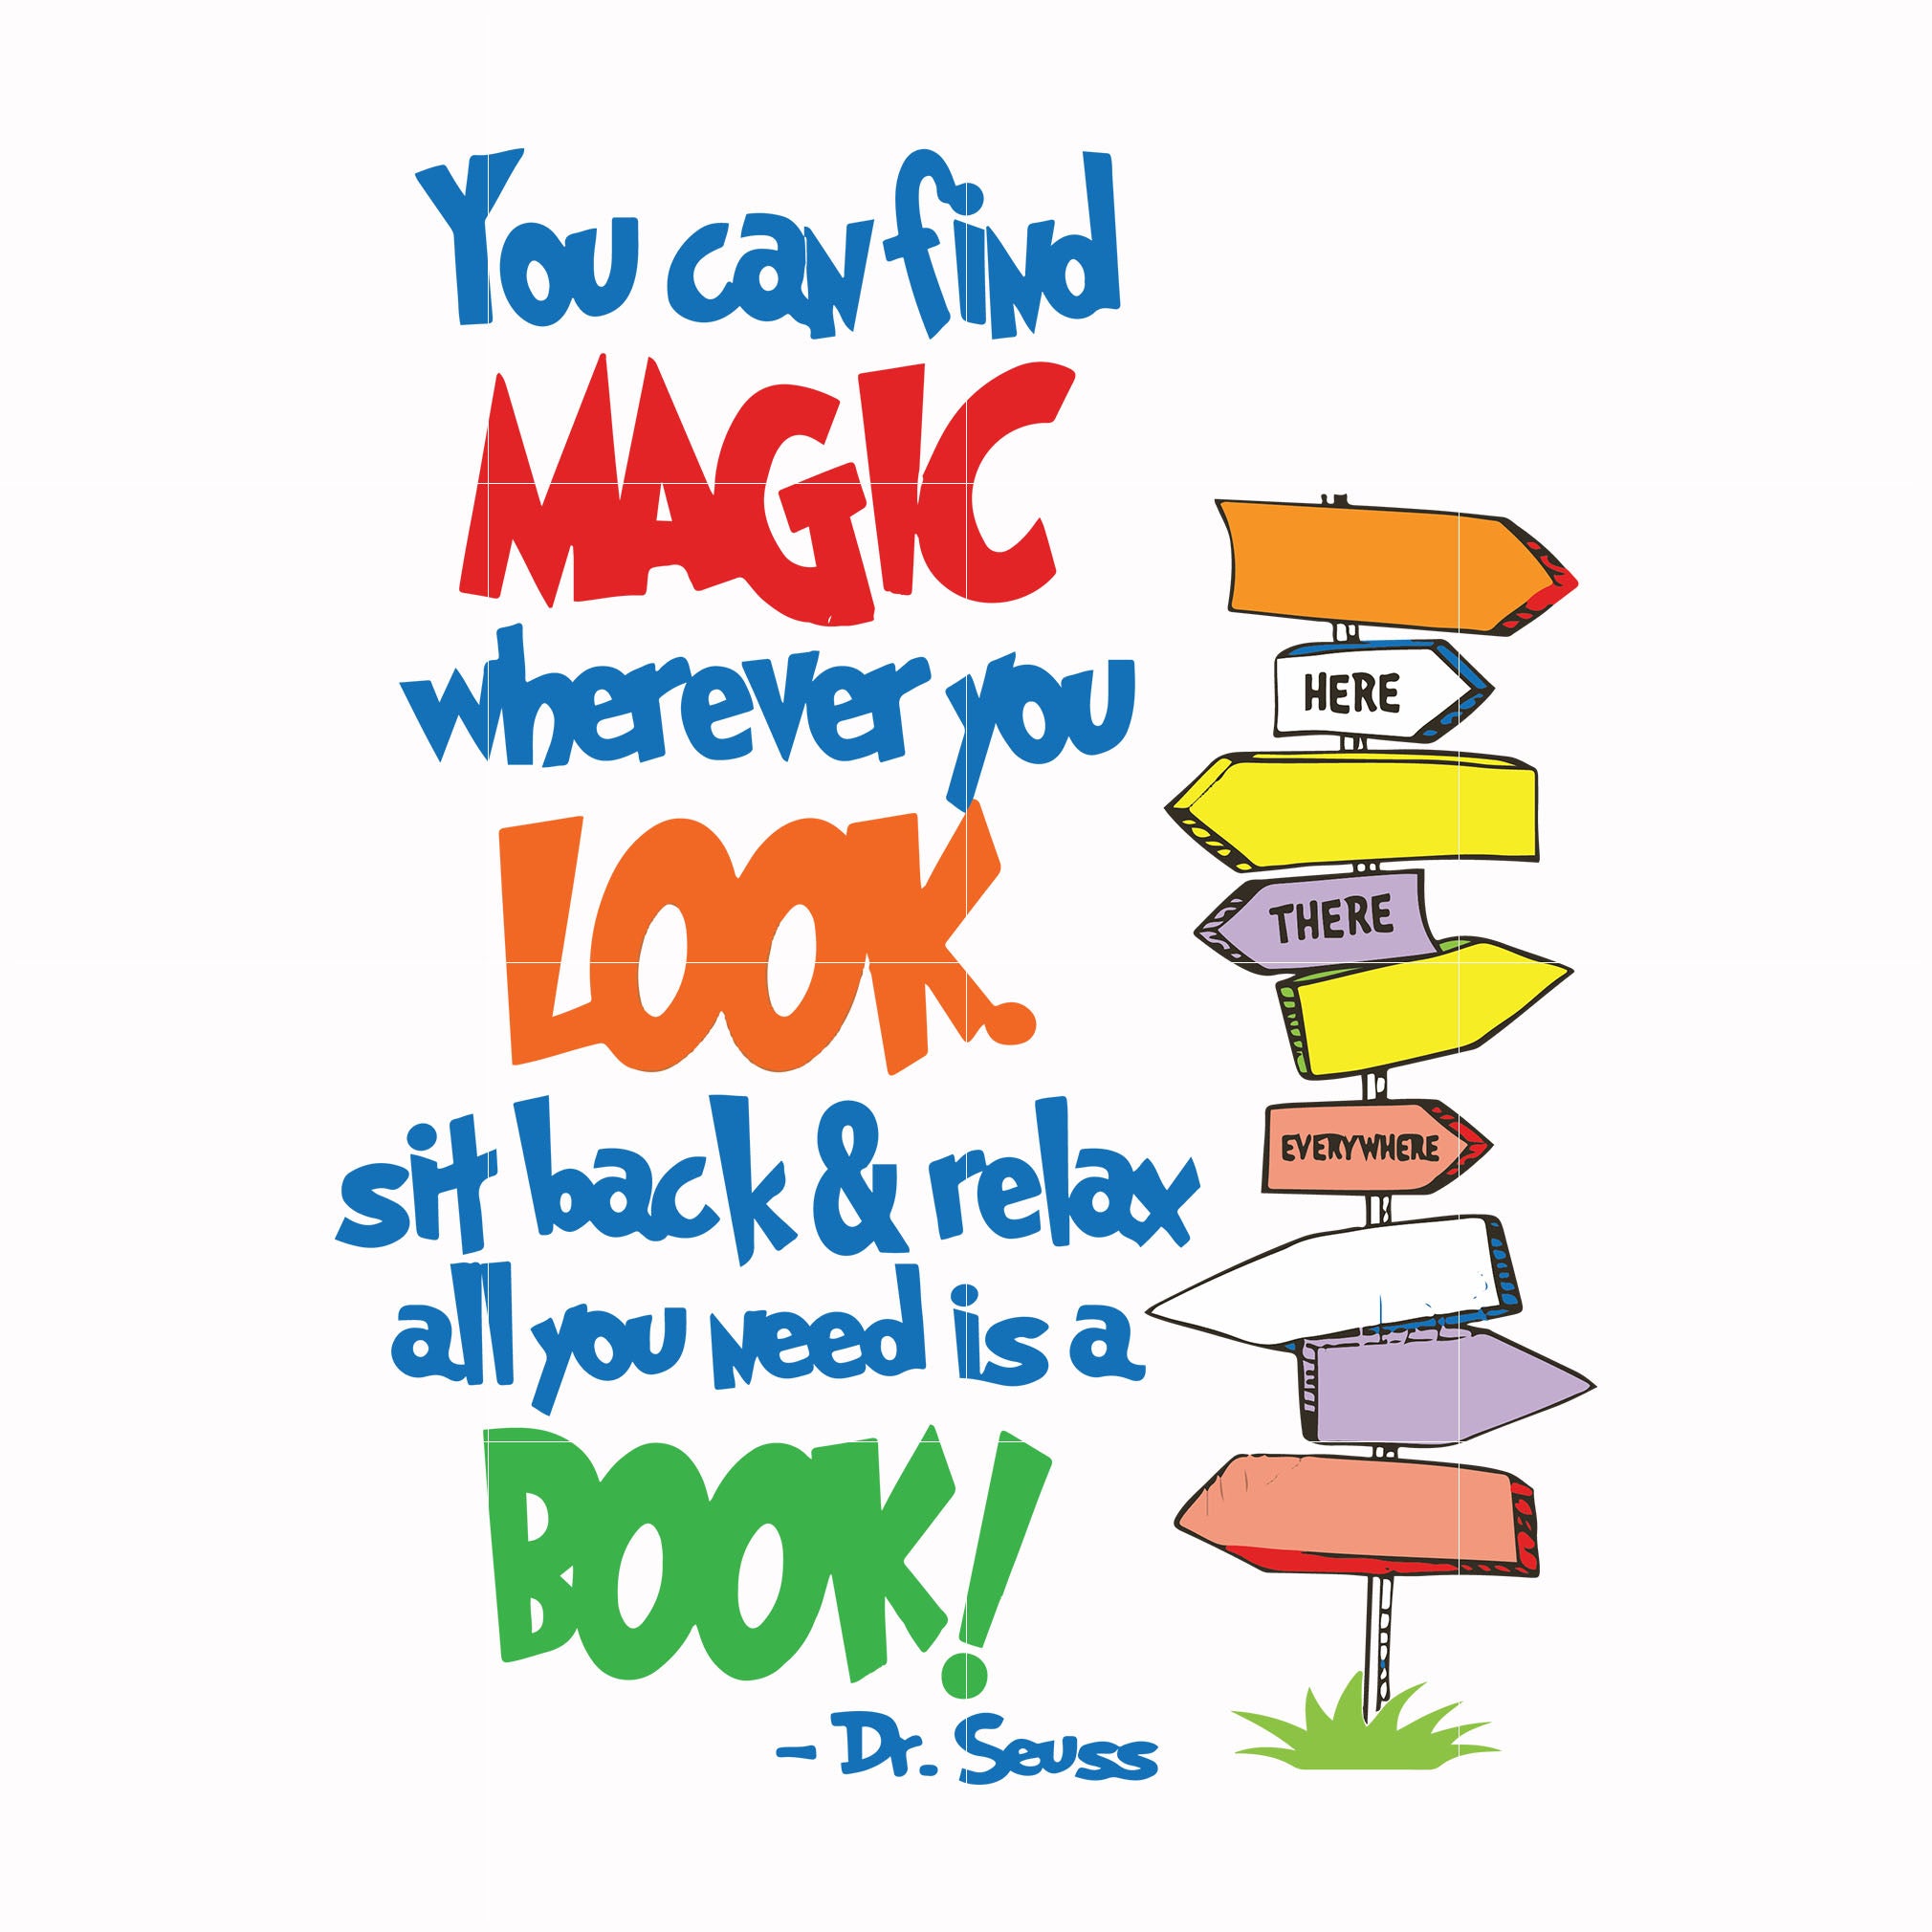 You can find magic wherever you look sit back & relax all you need is a book svg, dr seuss svg, eps, png, dxf